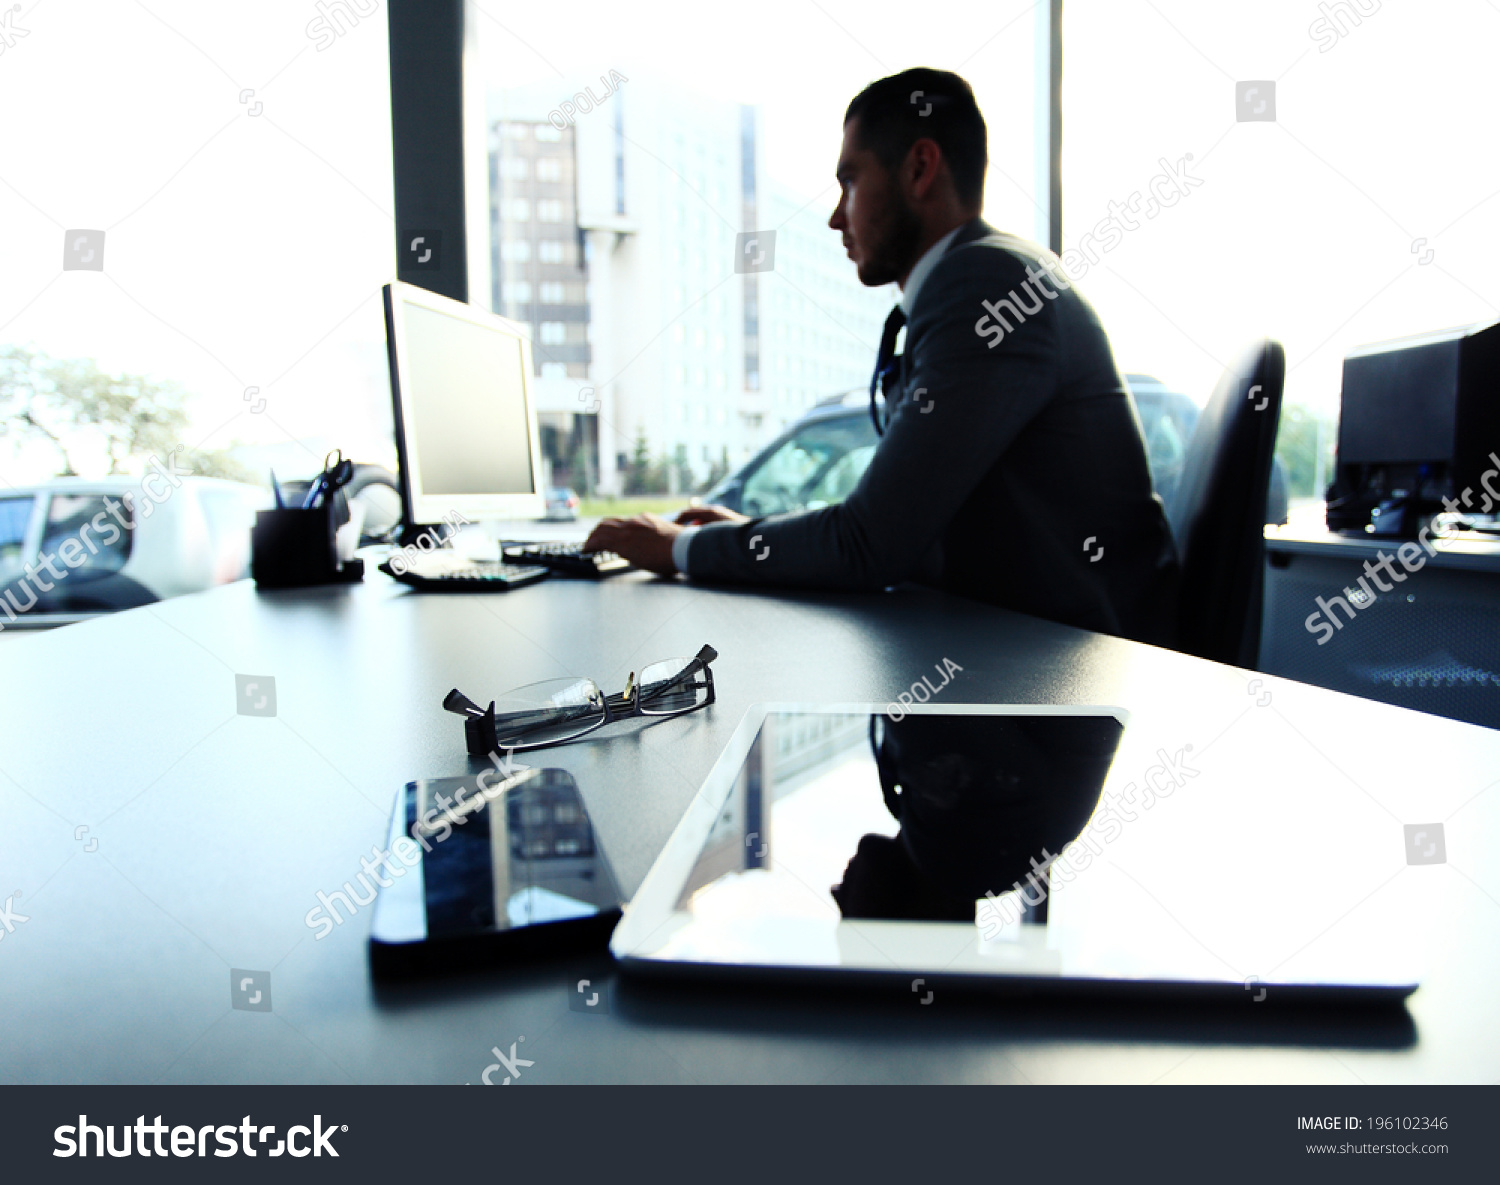 Silhouette of businessman using laptop in office  #196102346